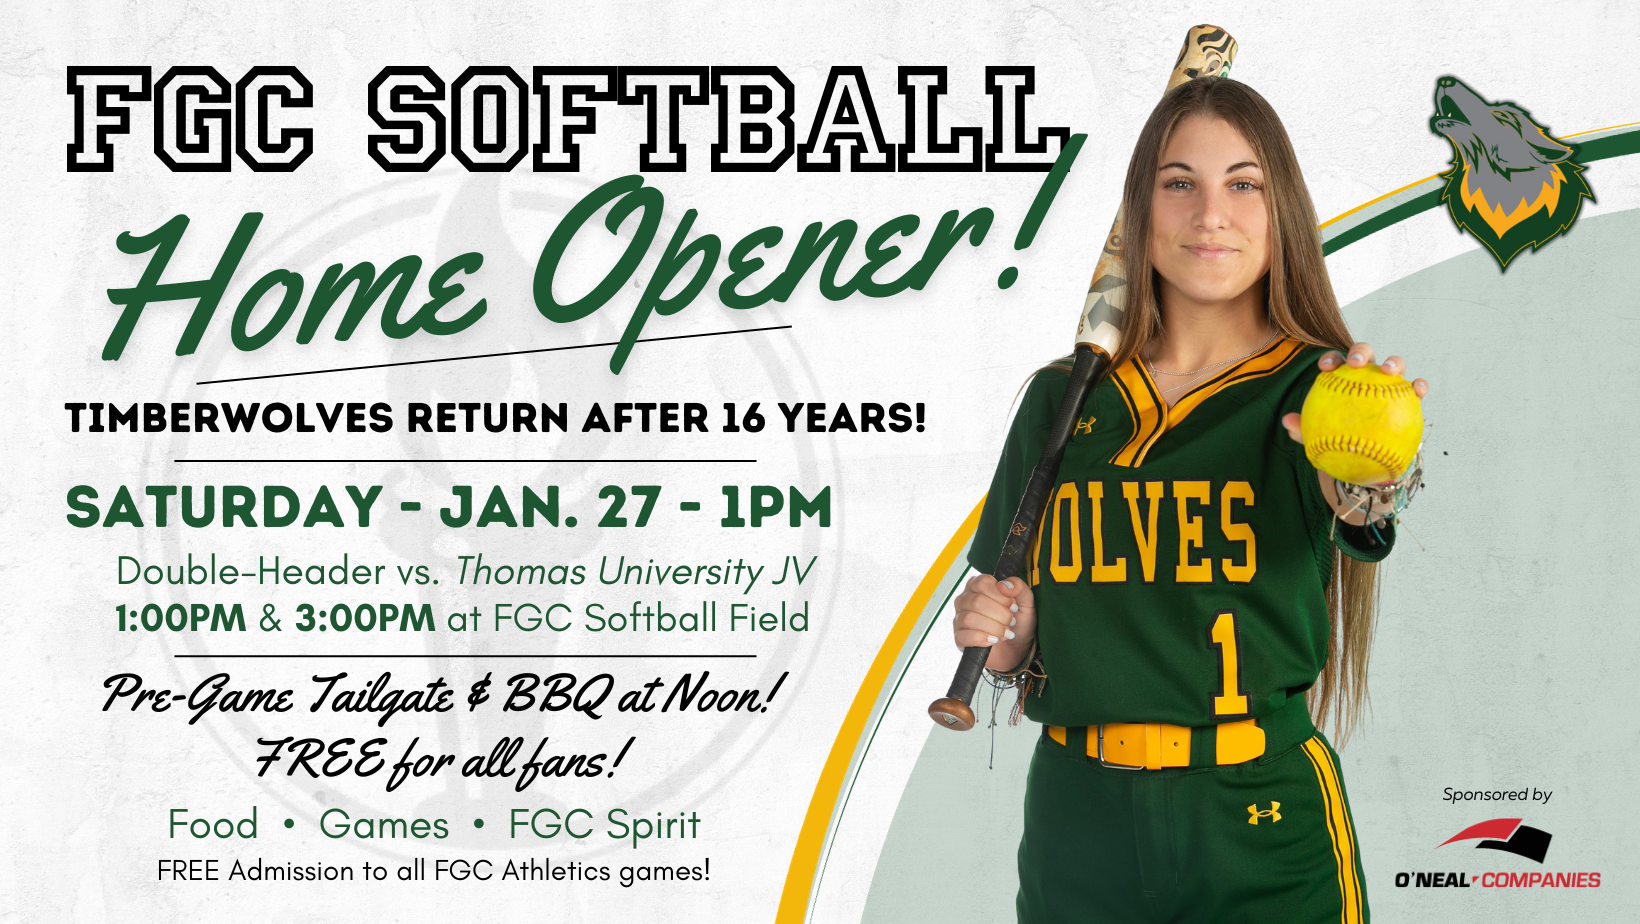 FGC Softball to Play First Home Opener in 16 Years